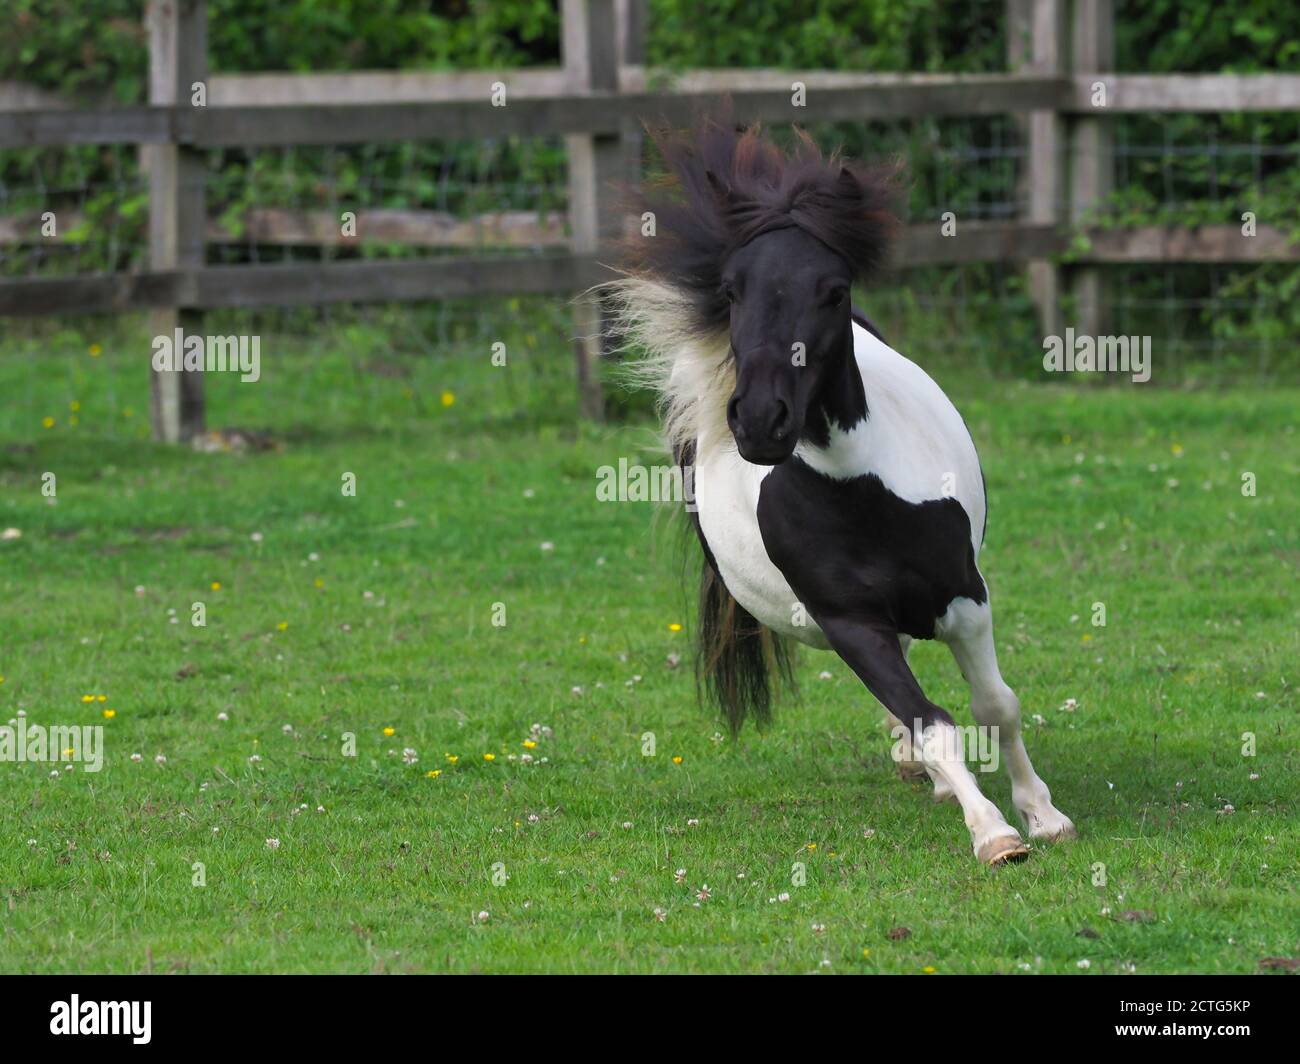 A young black and white miniature shetland pony plays in a paddock. Stock Photo